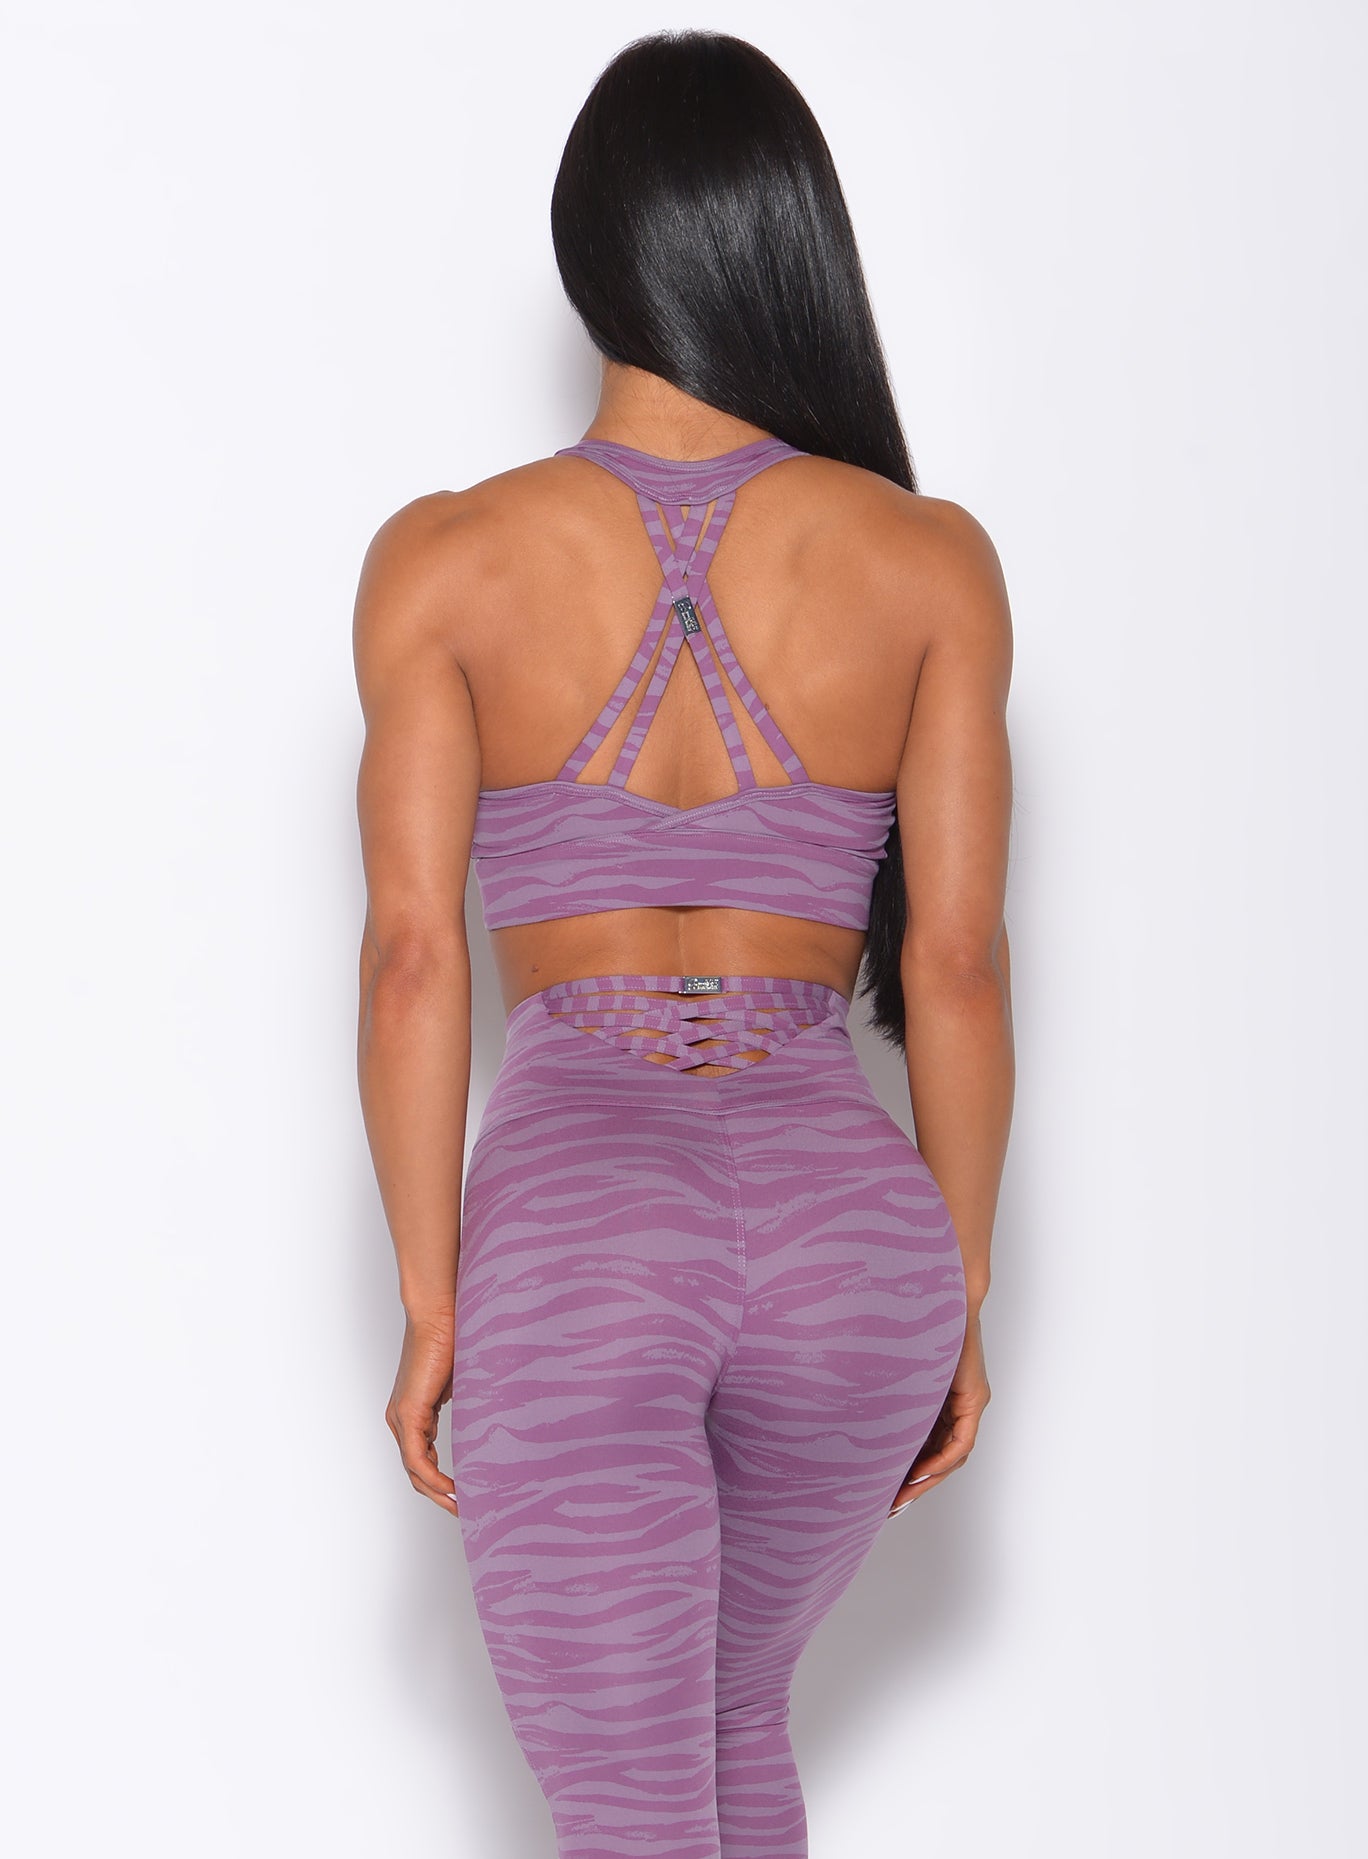 Back  profile view of a model wearing our tiger printed rival sports bra in orchid purple color and a matching sexy back leggings